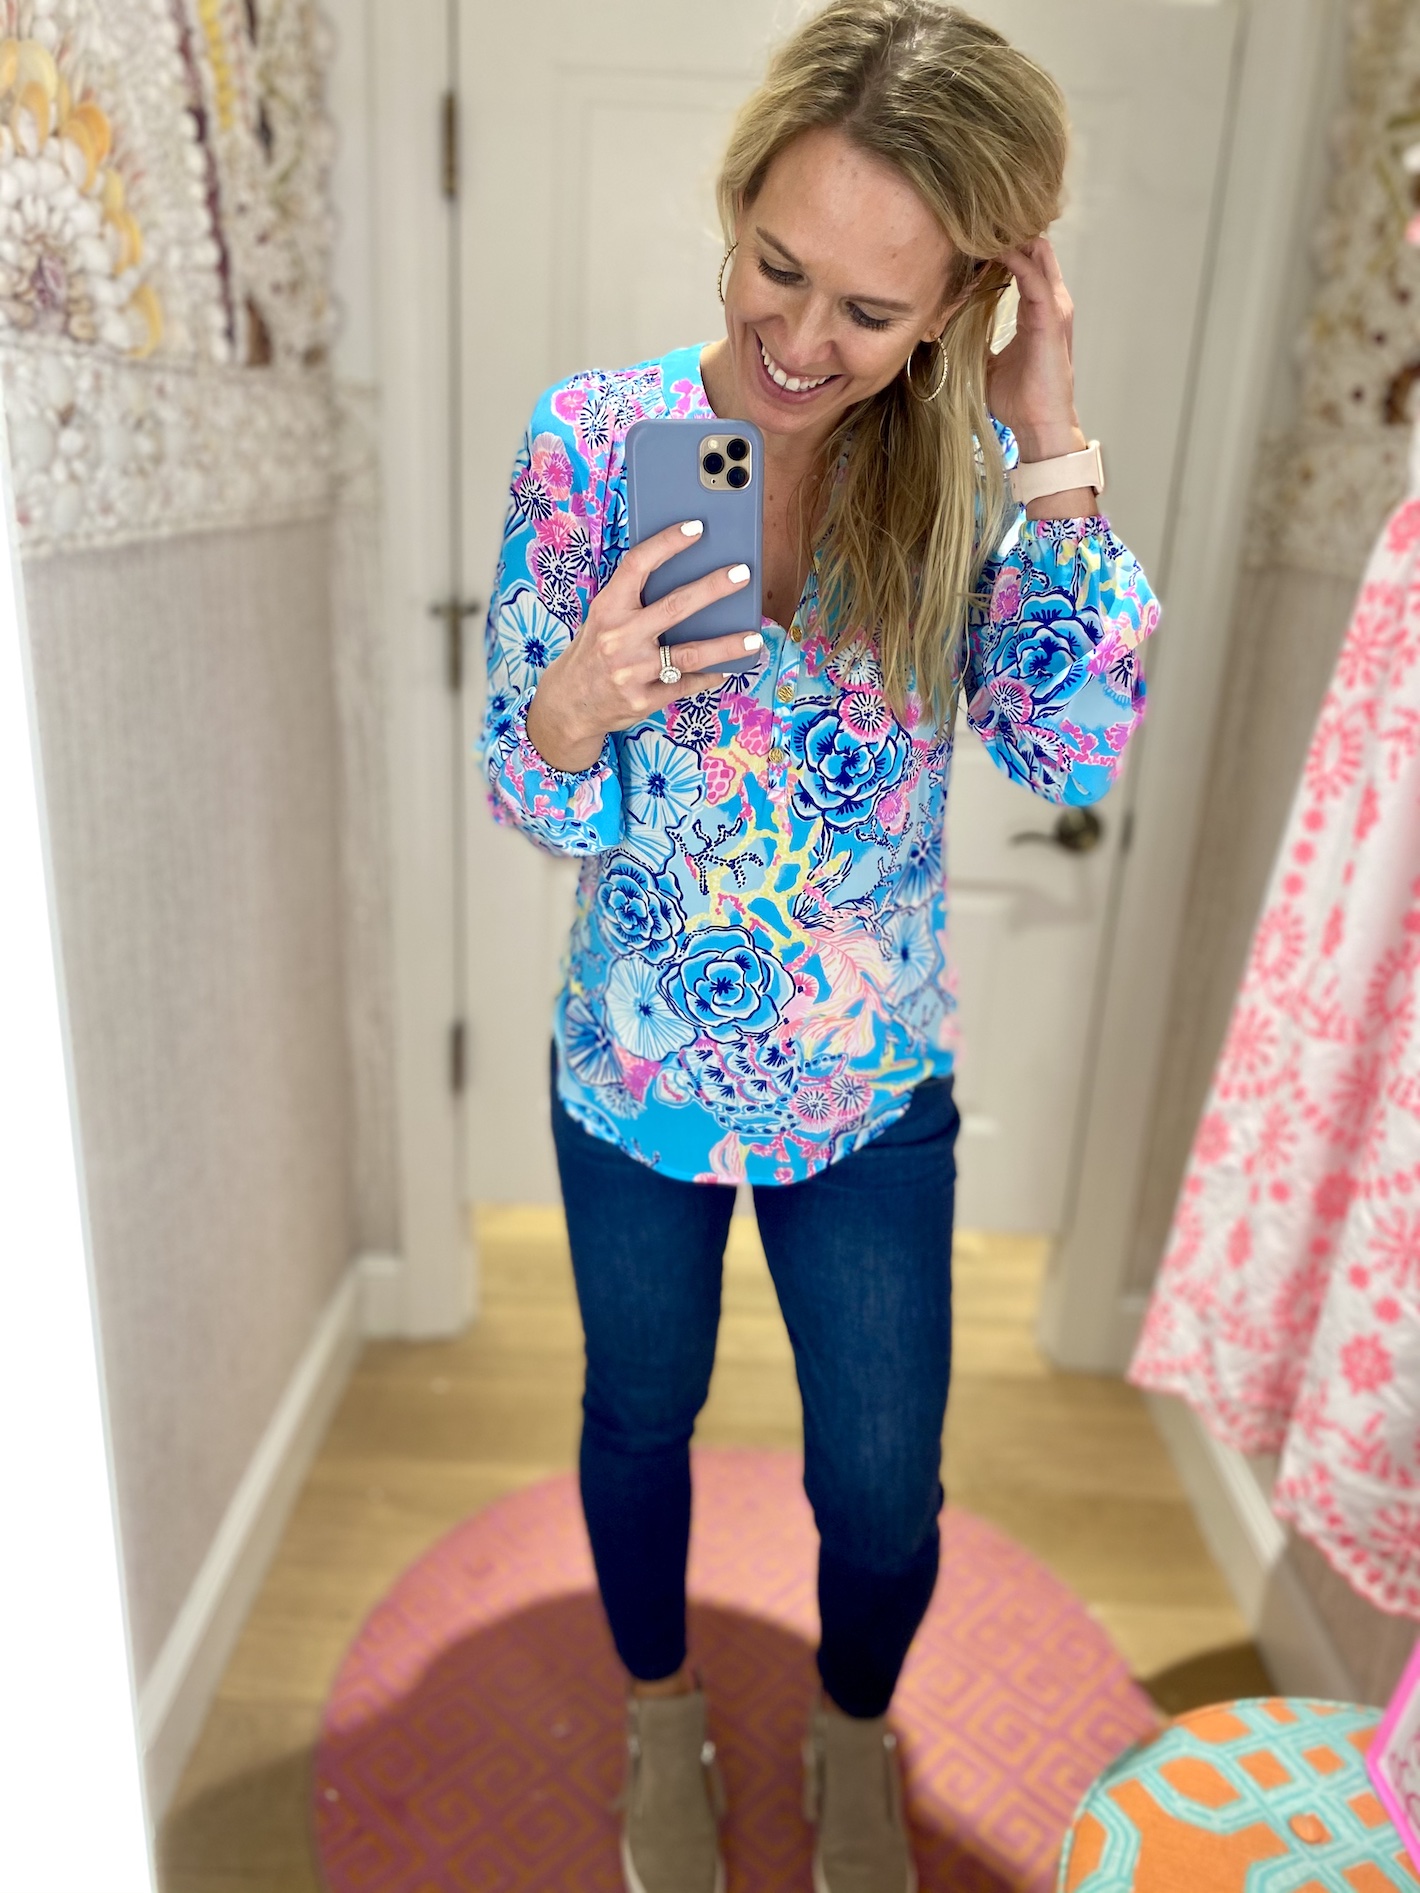 2021 Summer Lilly Pulitzer After Party Sale guide, with estimated sale date, prices, Lilly Pulitzer on sale currently, a gift card GIVEAWAY and tips! 